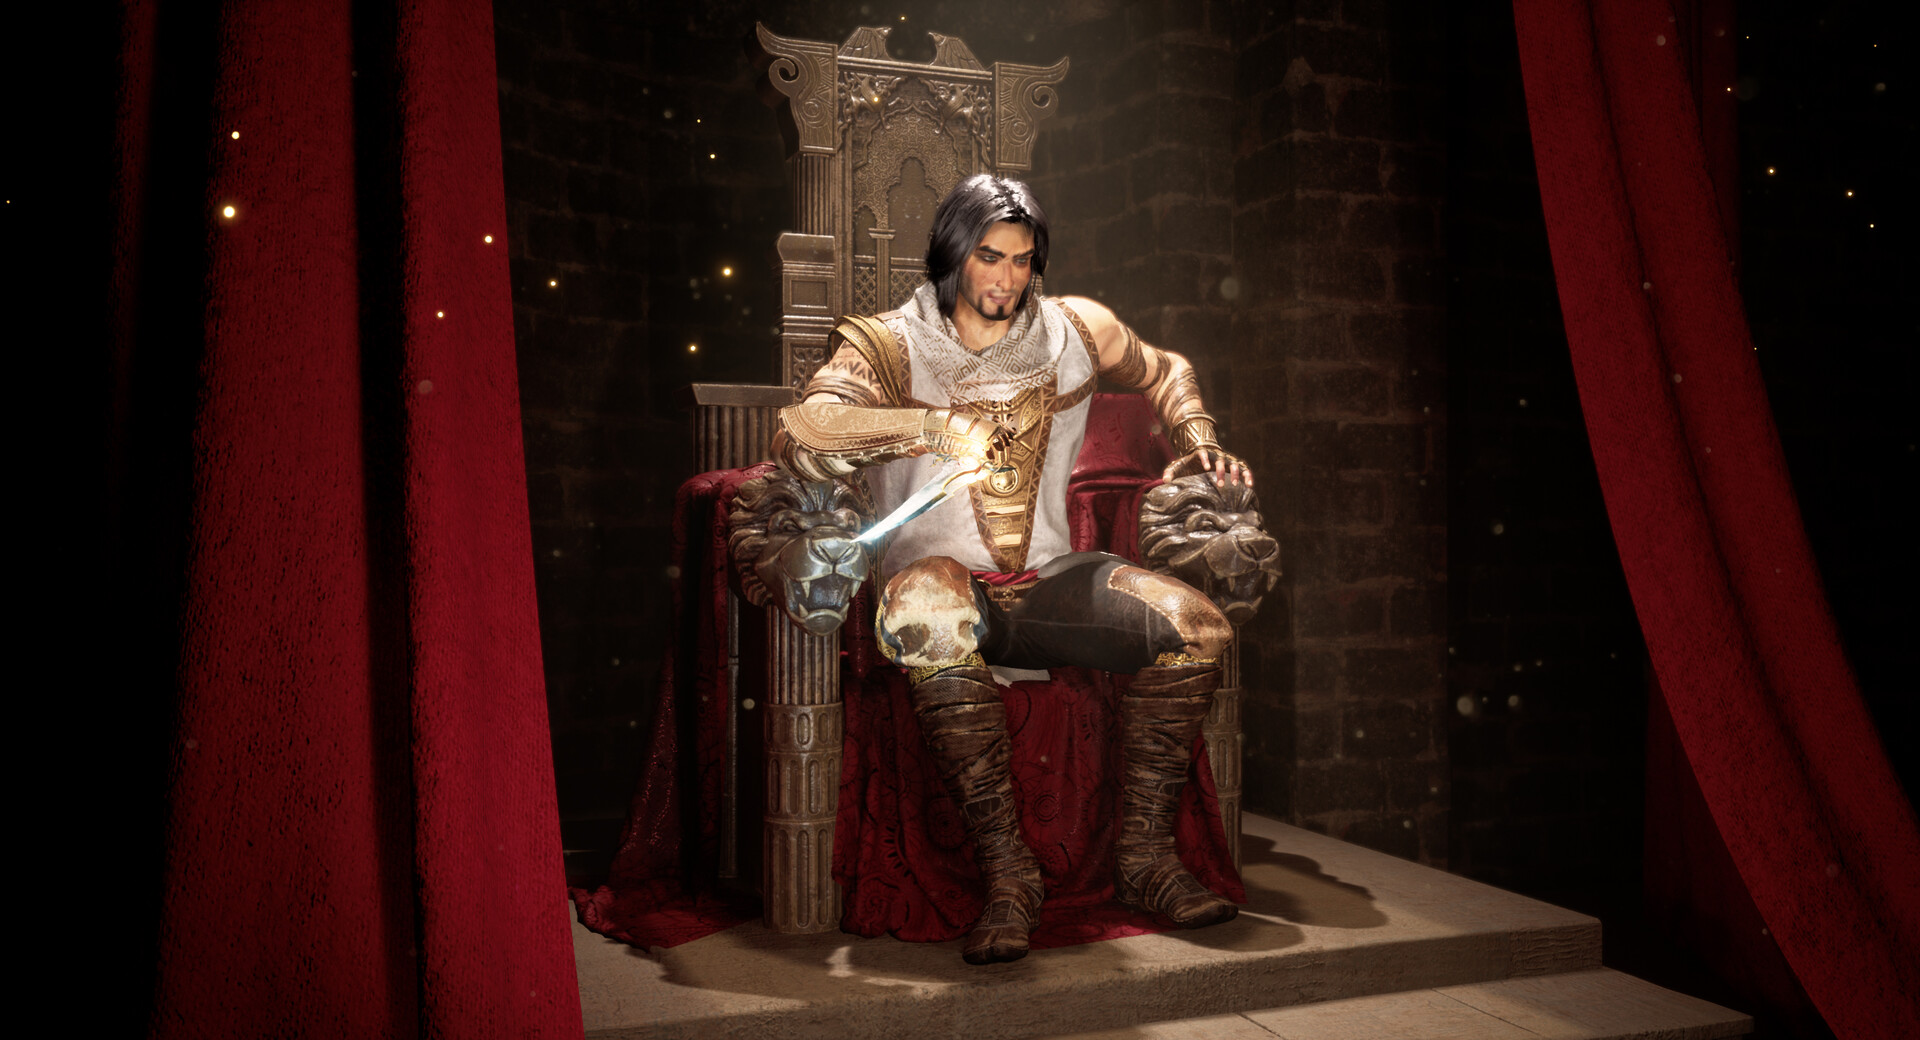 ArtStation - Prince of Persia Two thrones